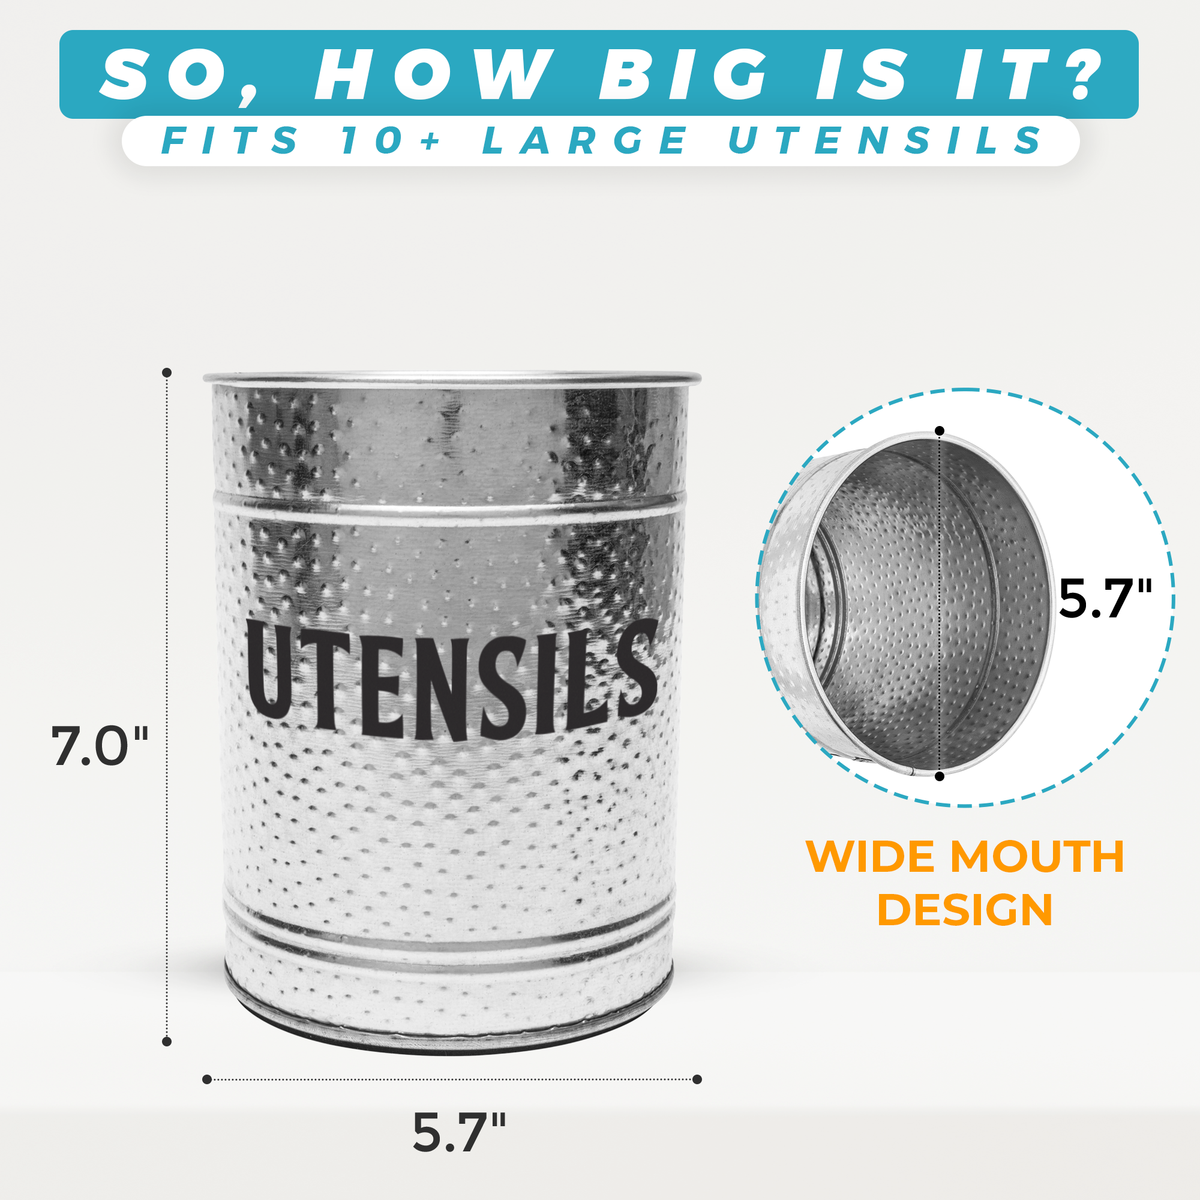 Wide mouth design on 5.7 x 5.7 x 7 inch utensil holder